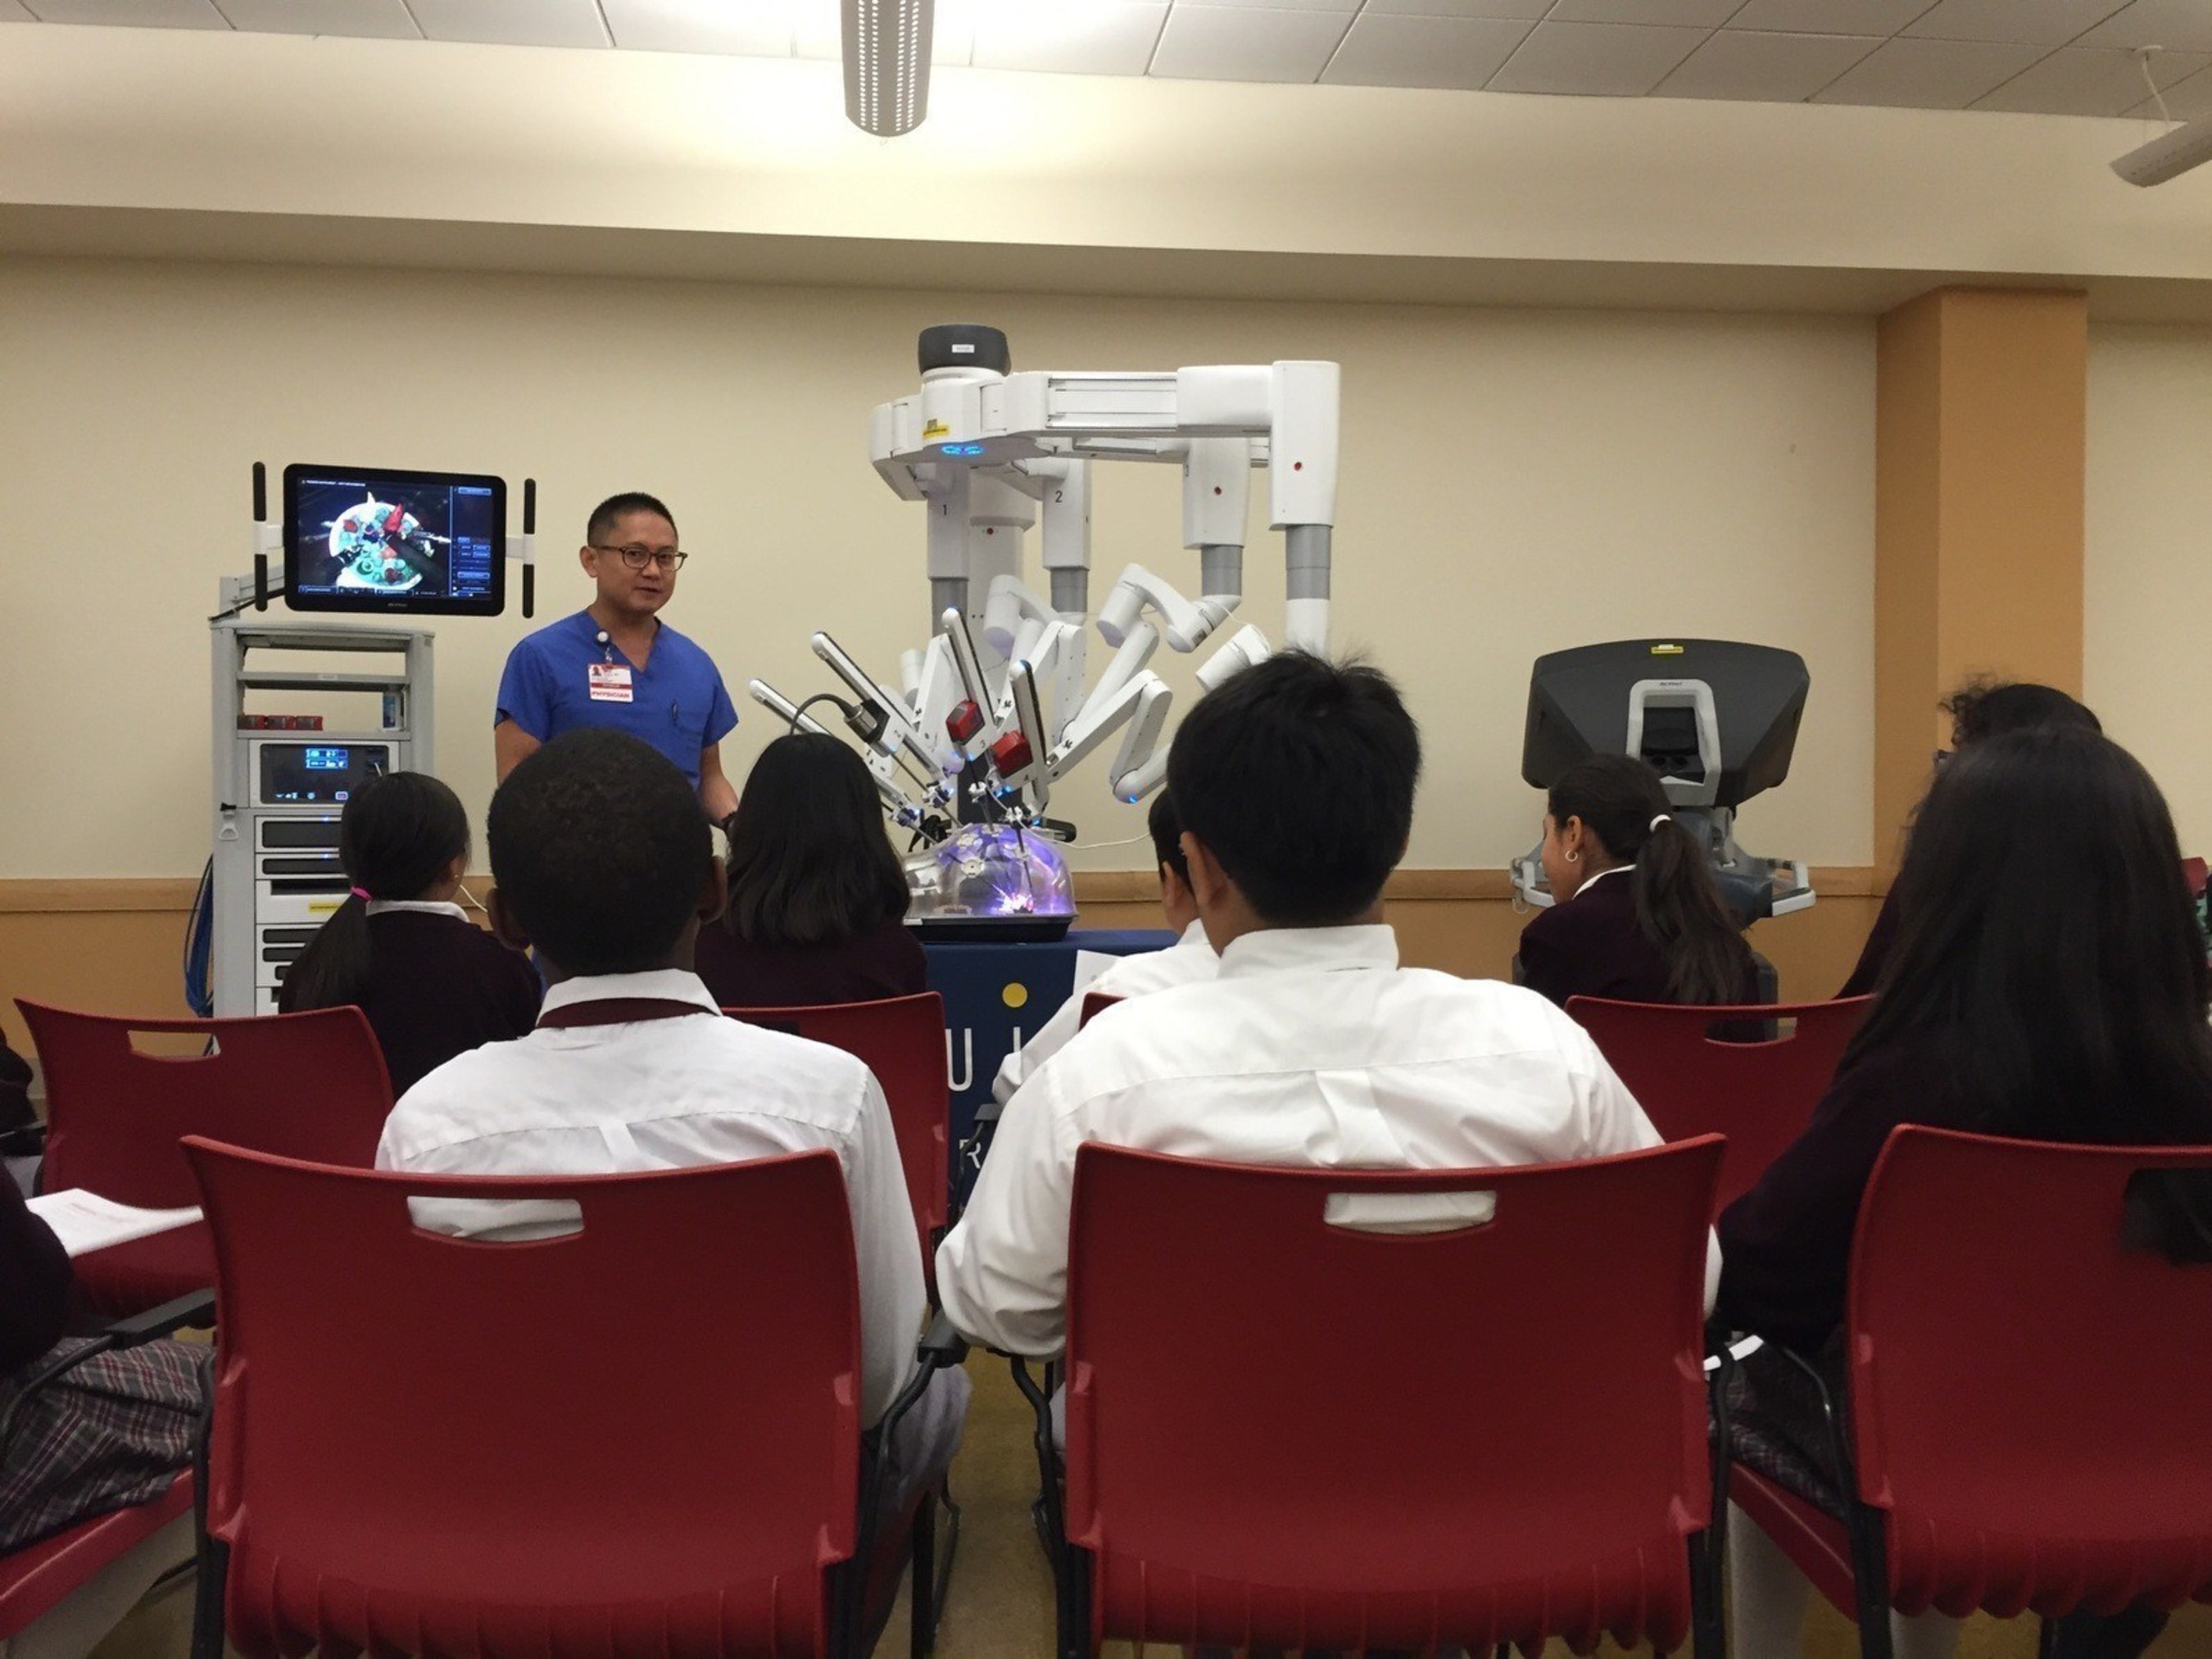 Dr. David Duong from Saint Francis Memorial Hospital shows the daVinci Robotic Surgical System to students at De Marillac Academy in San Francisco.